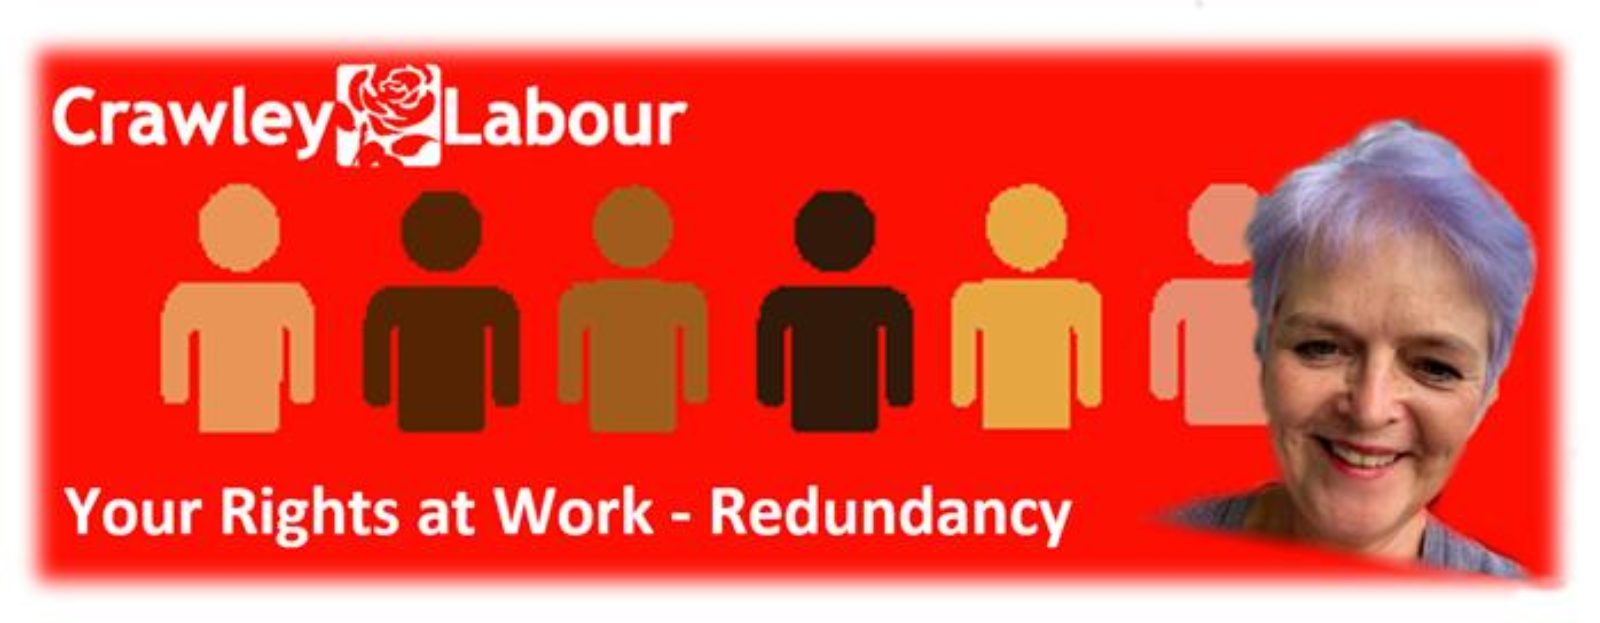 Redundancy - your rights at work